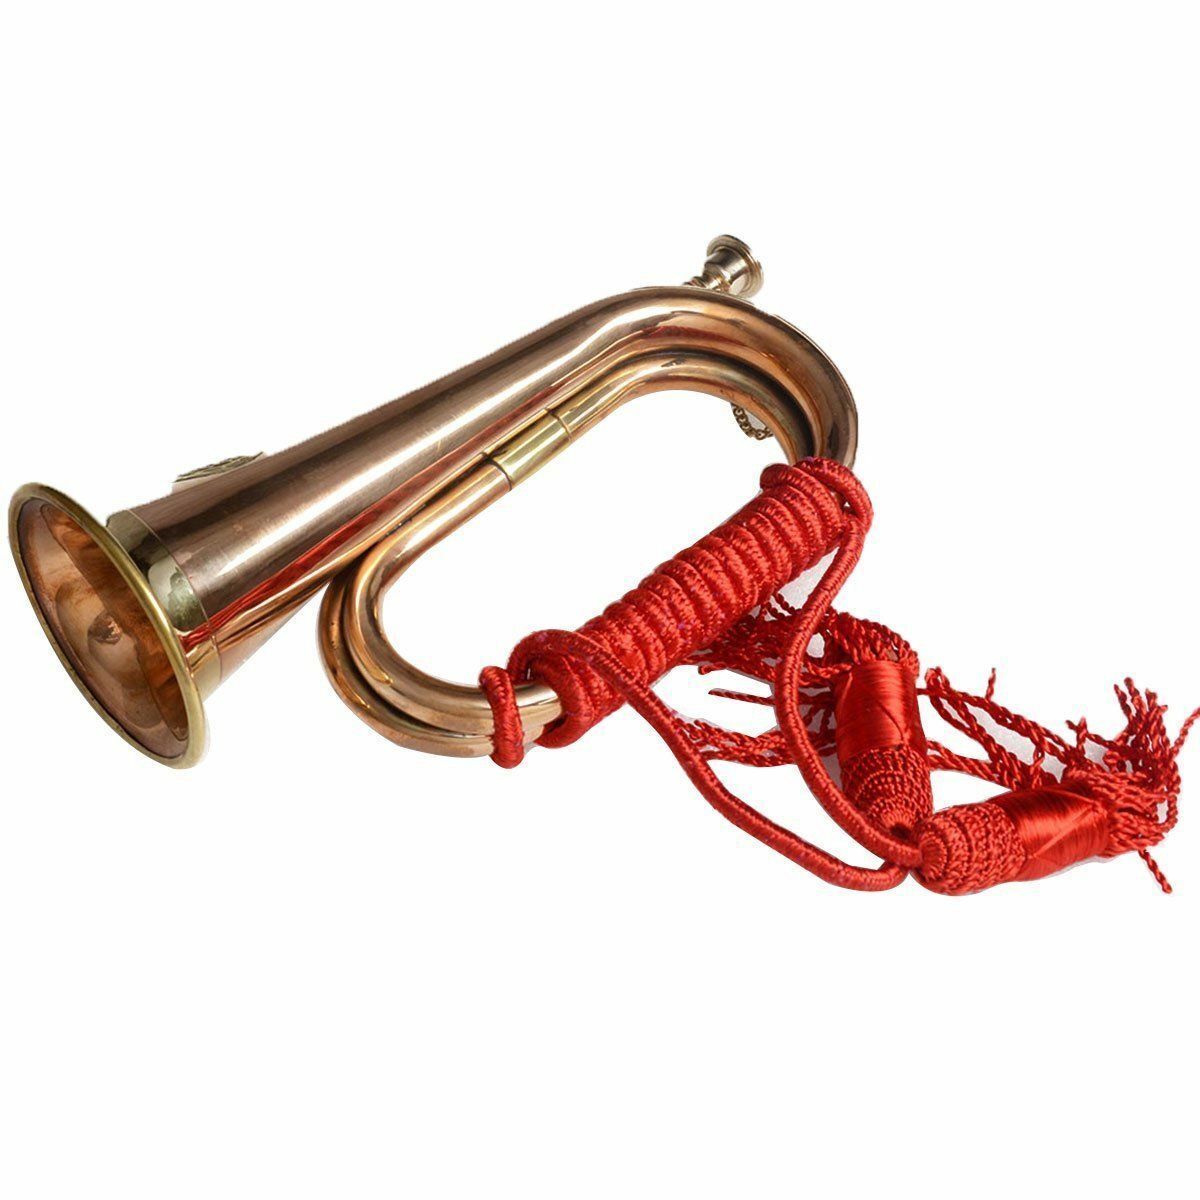 Real Copper Boy Scout Bugle Horn- Red Rope 2 Set